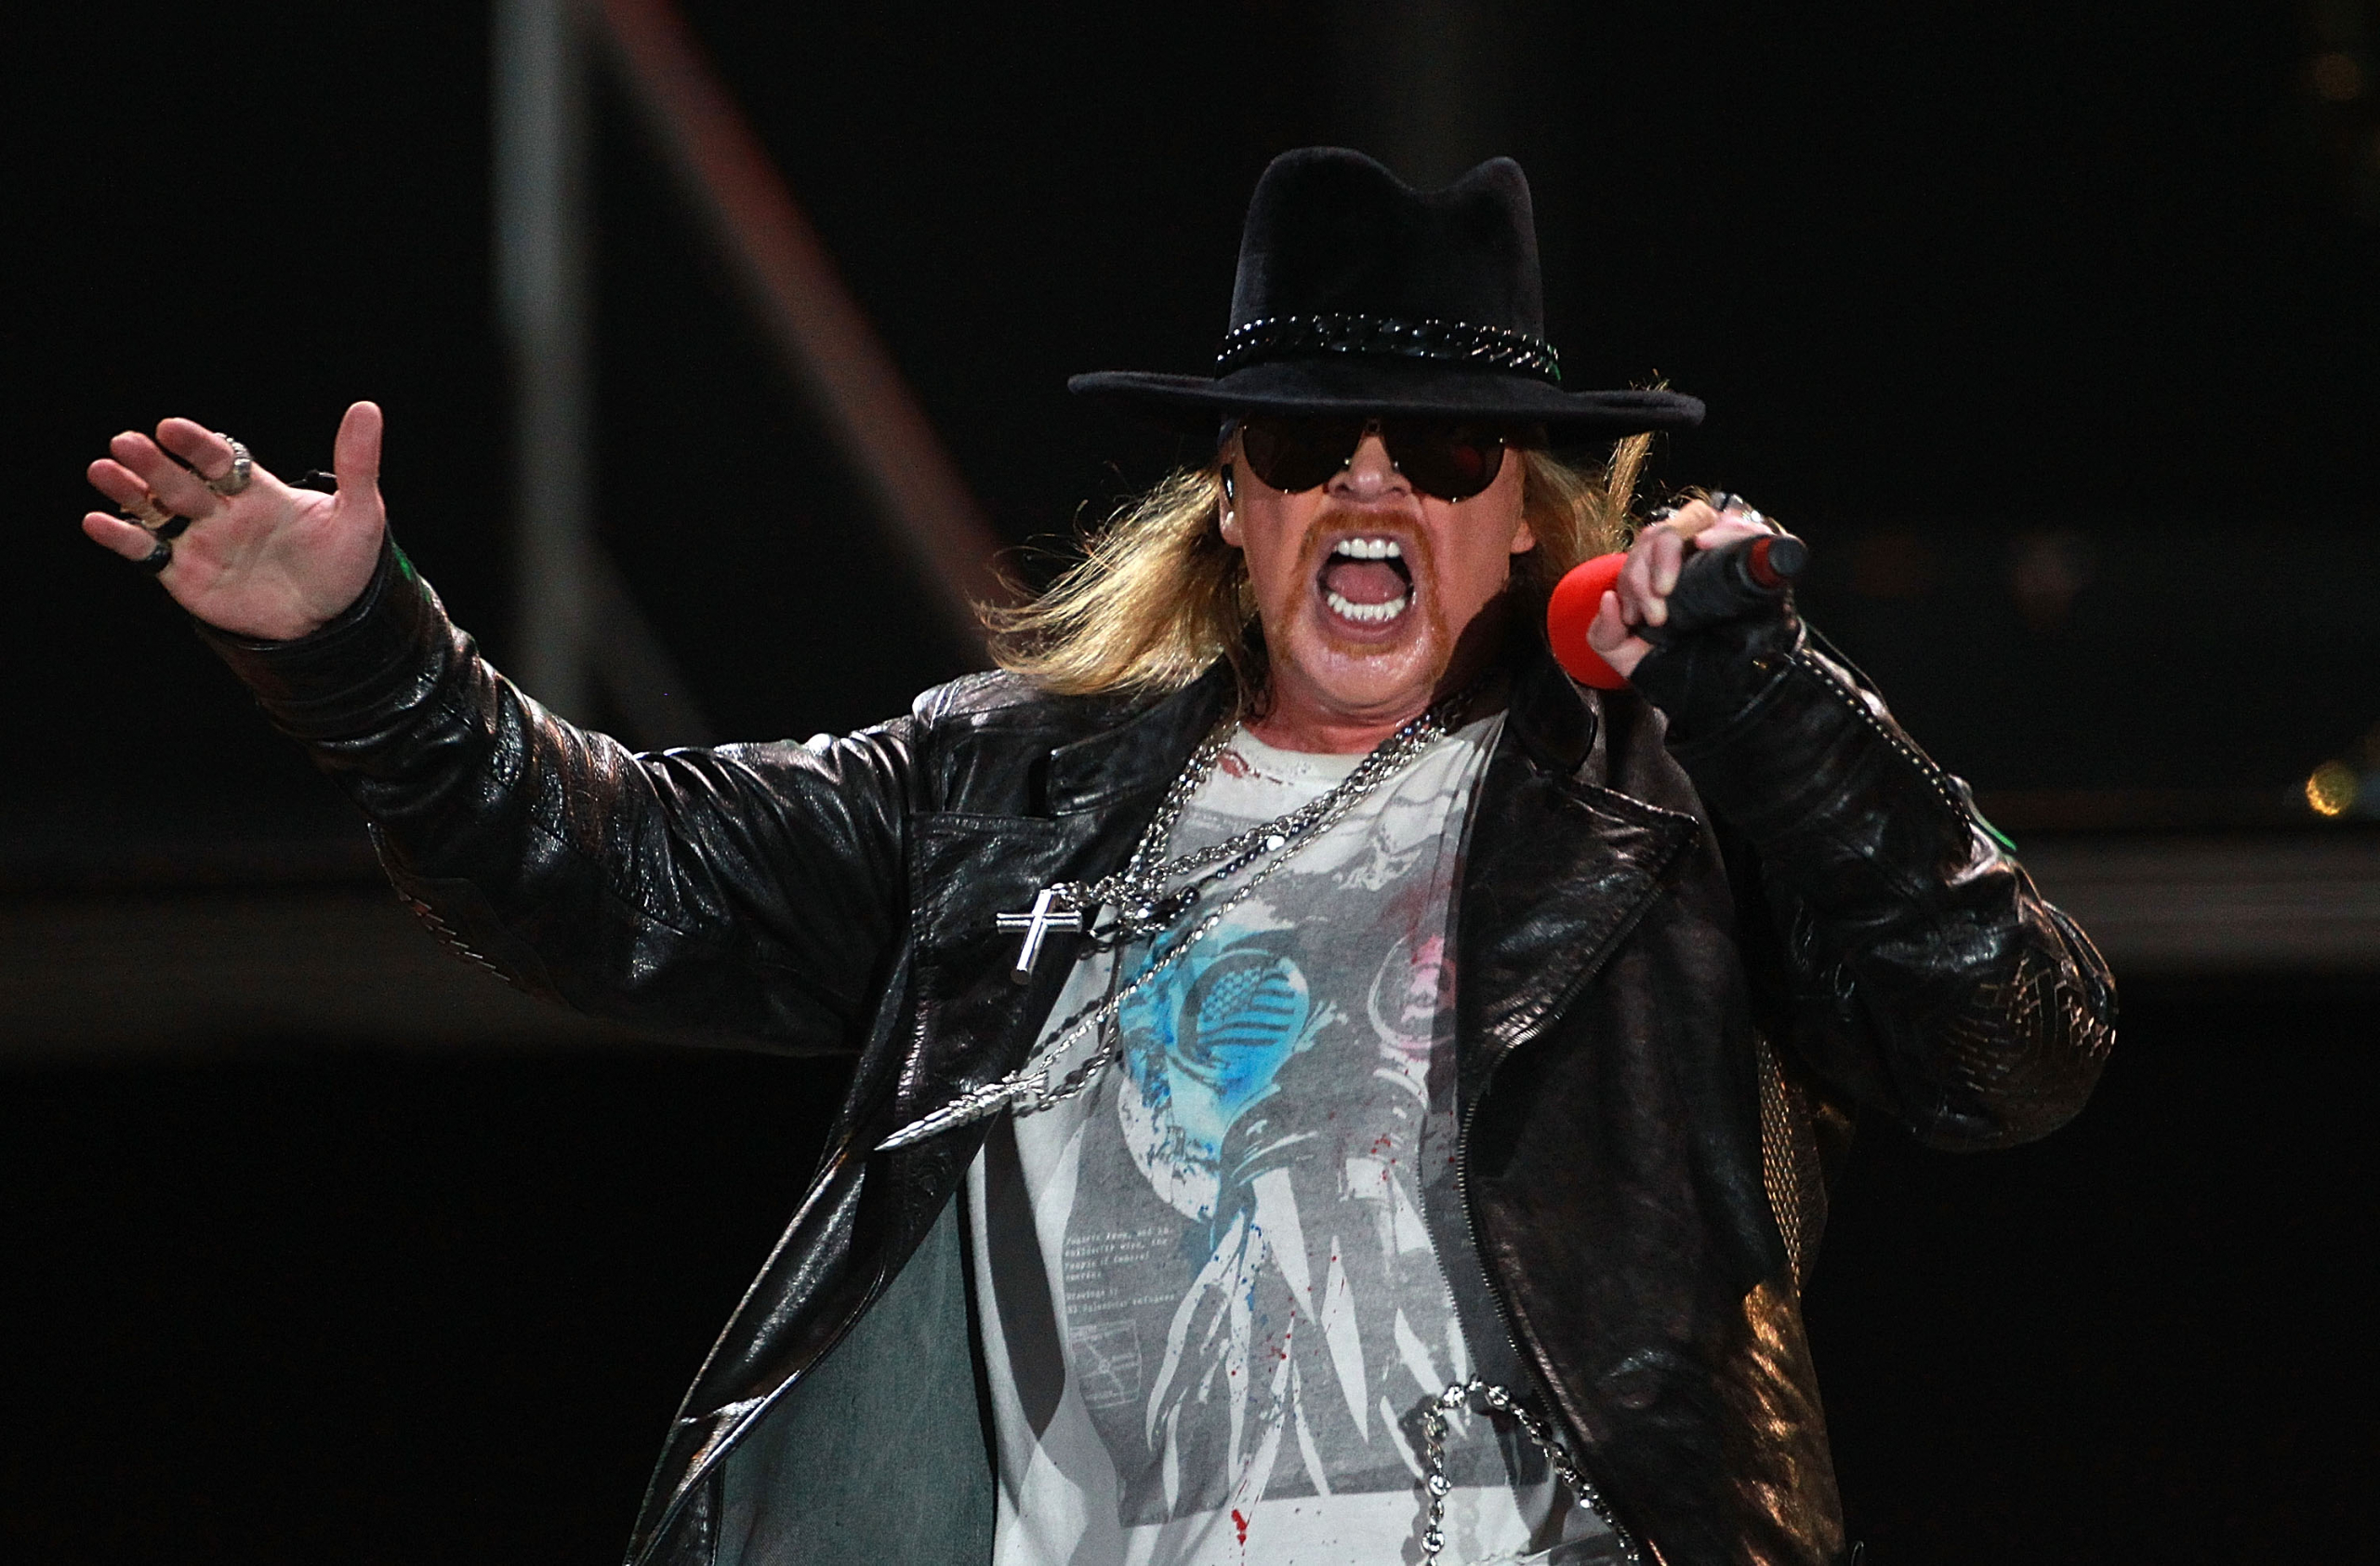 Axl Rose and Carrie Underwood together on stage?